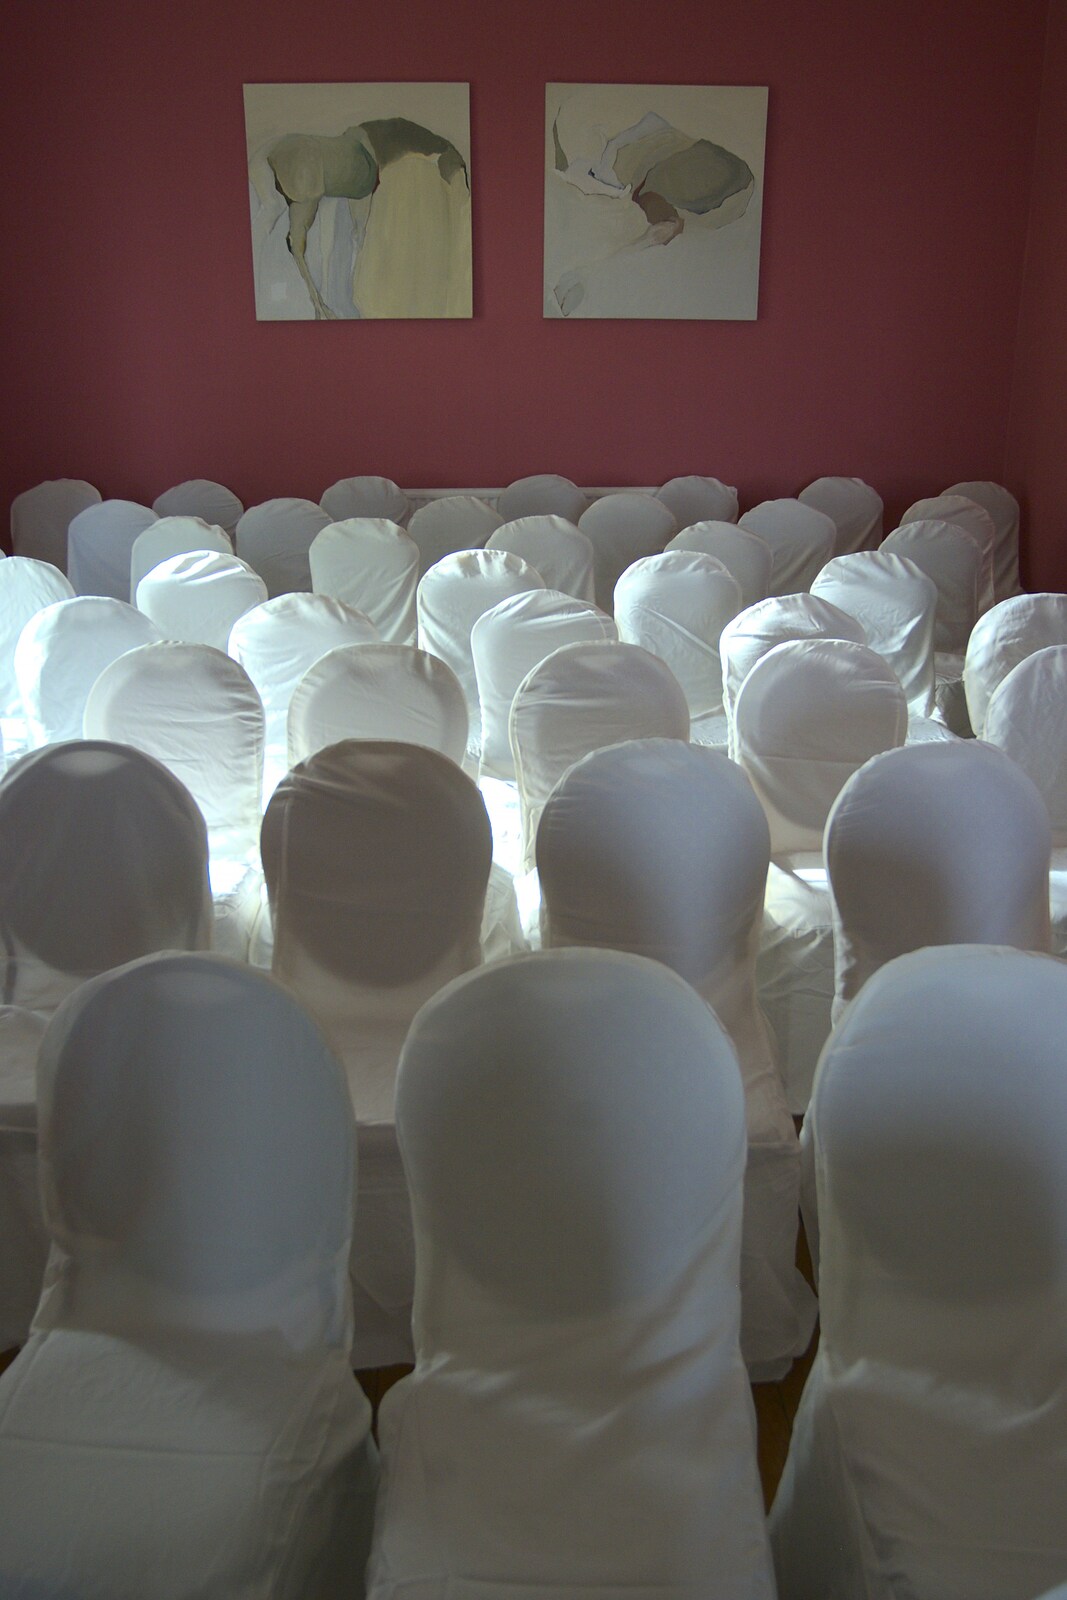 A collection of wedding chairs from A Trip to Dingle, County Kerry, Ireland - 21st July 2009